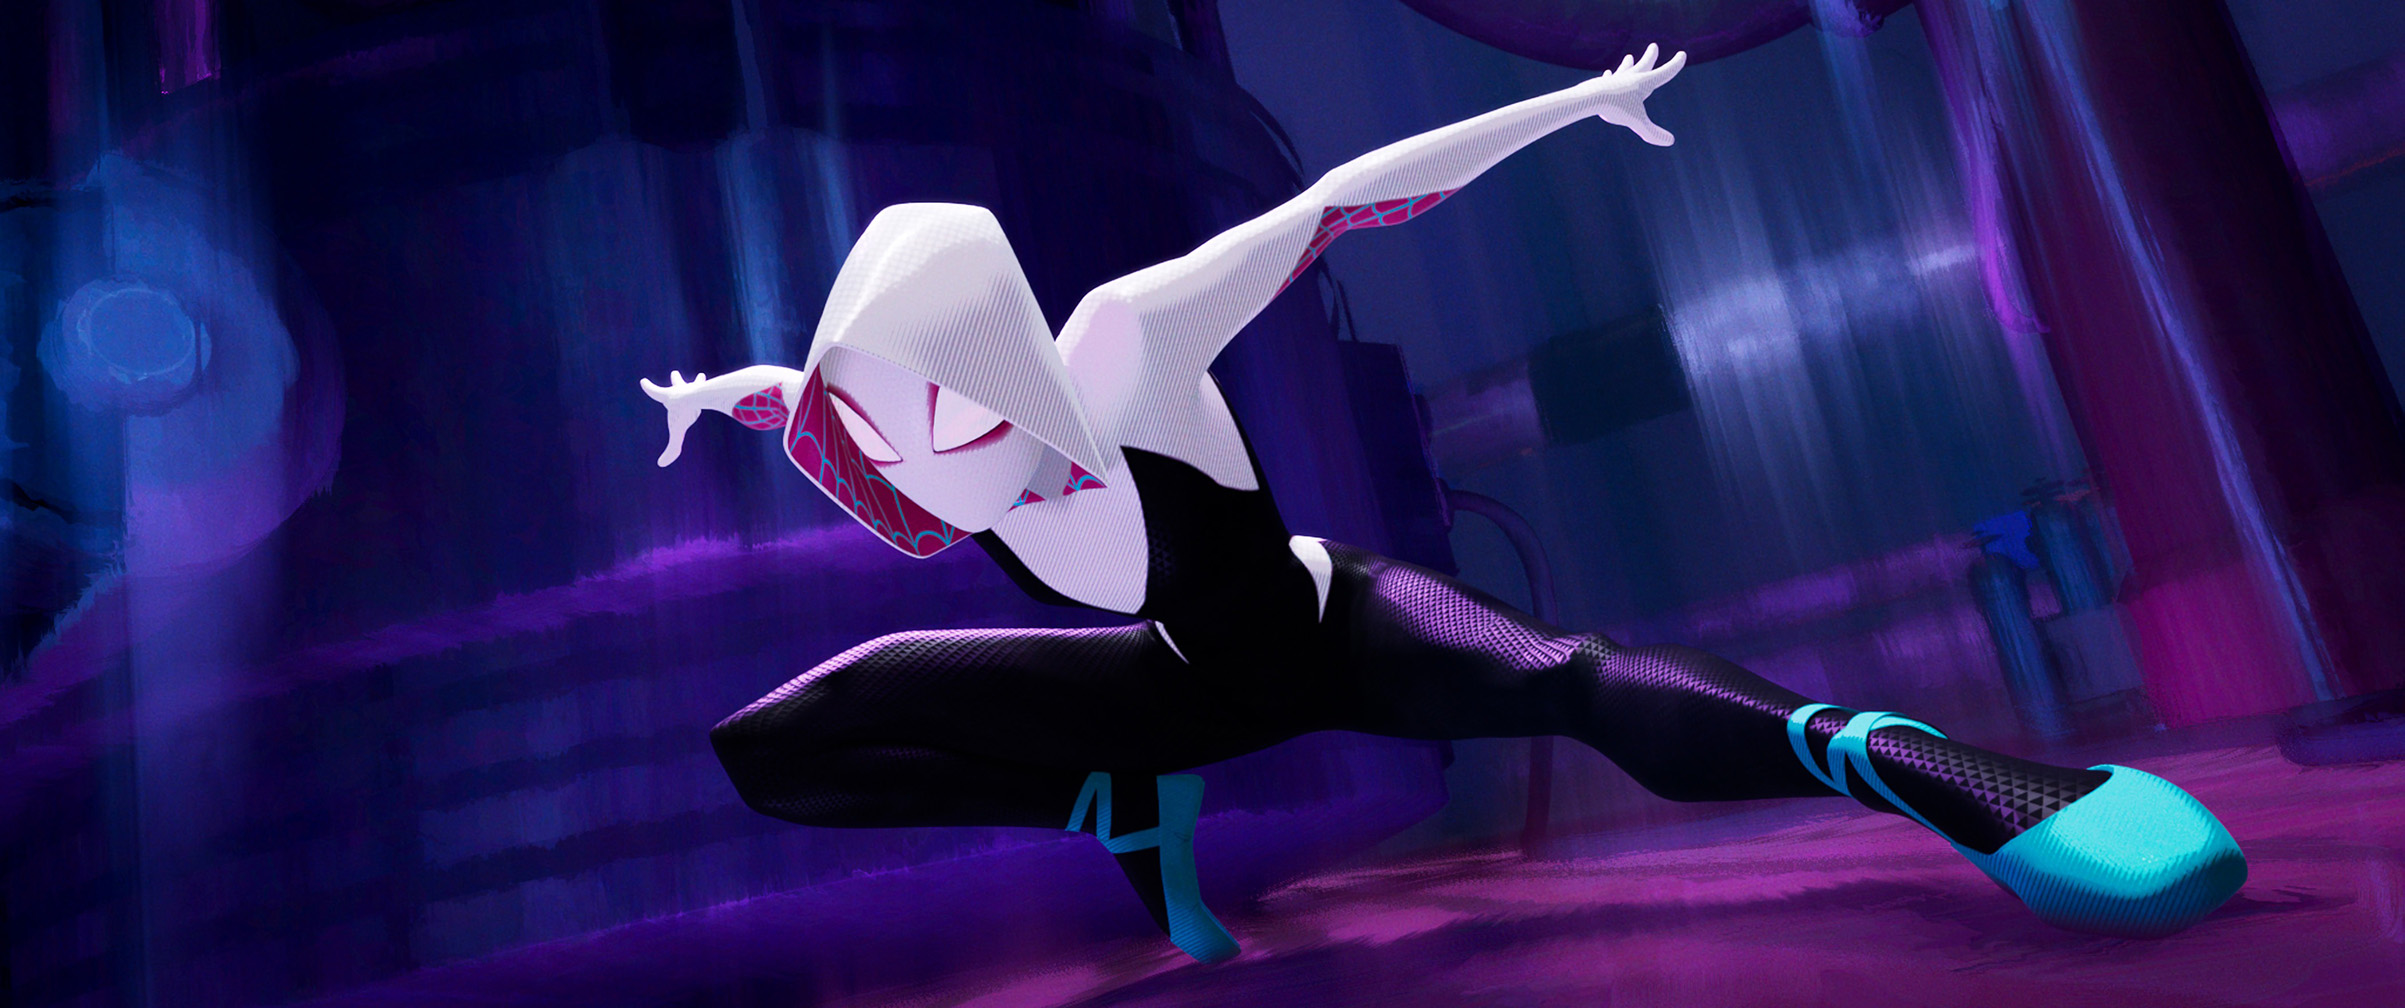 In one of Into the Spider-Verse’s many parallel worlds, Peter’s friend Gwen Stacy gets bitten by the radioactive spider. She becomes the hero and Peter the one who needs saving. (Sony Pictures Animation)